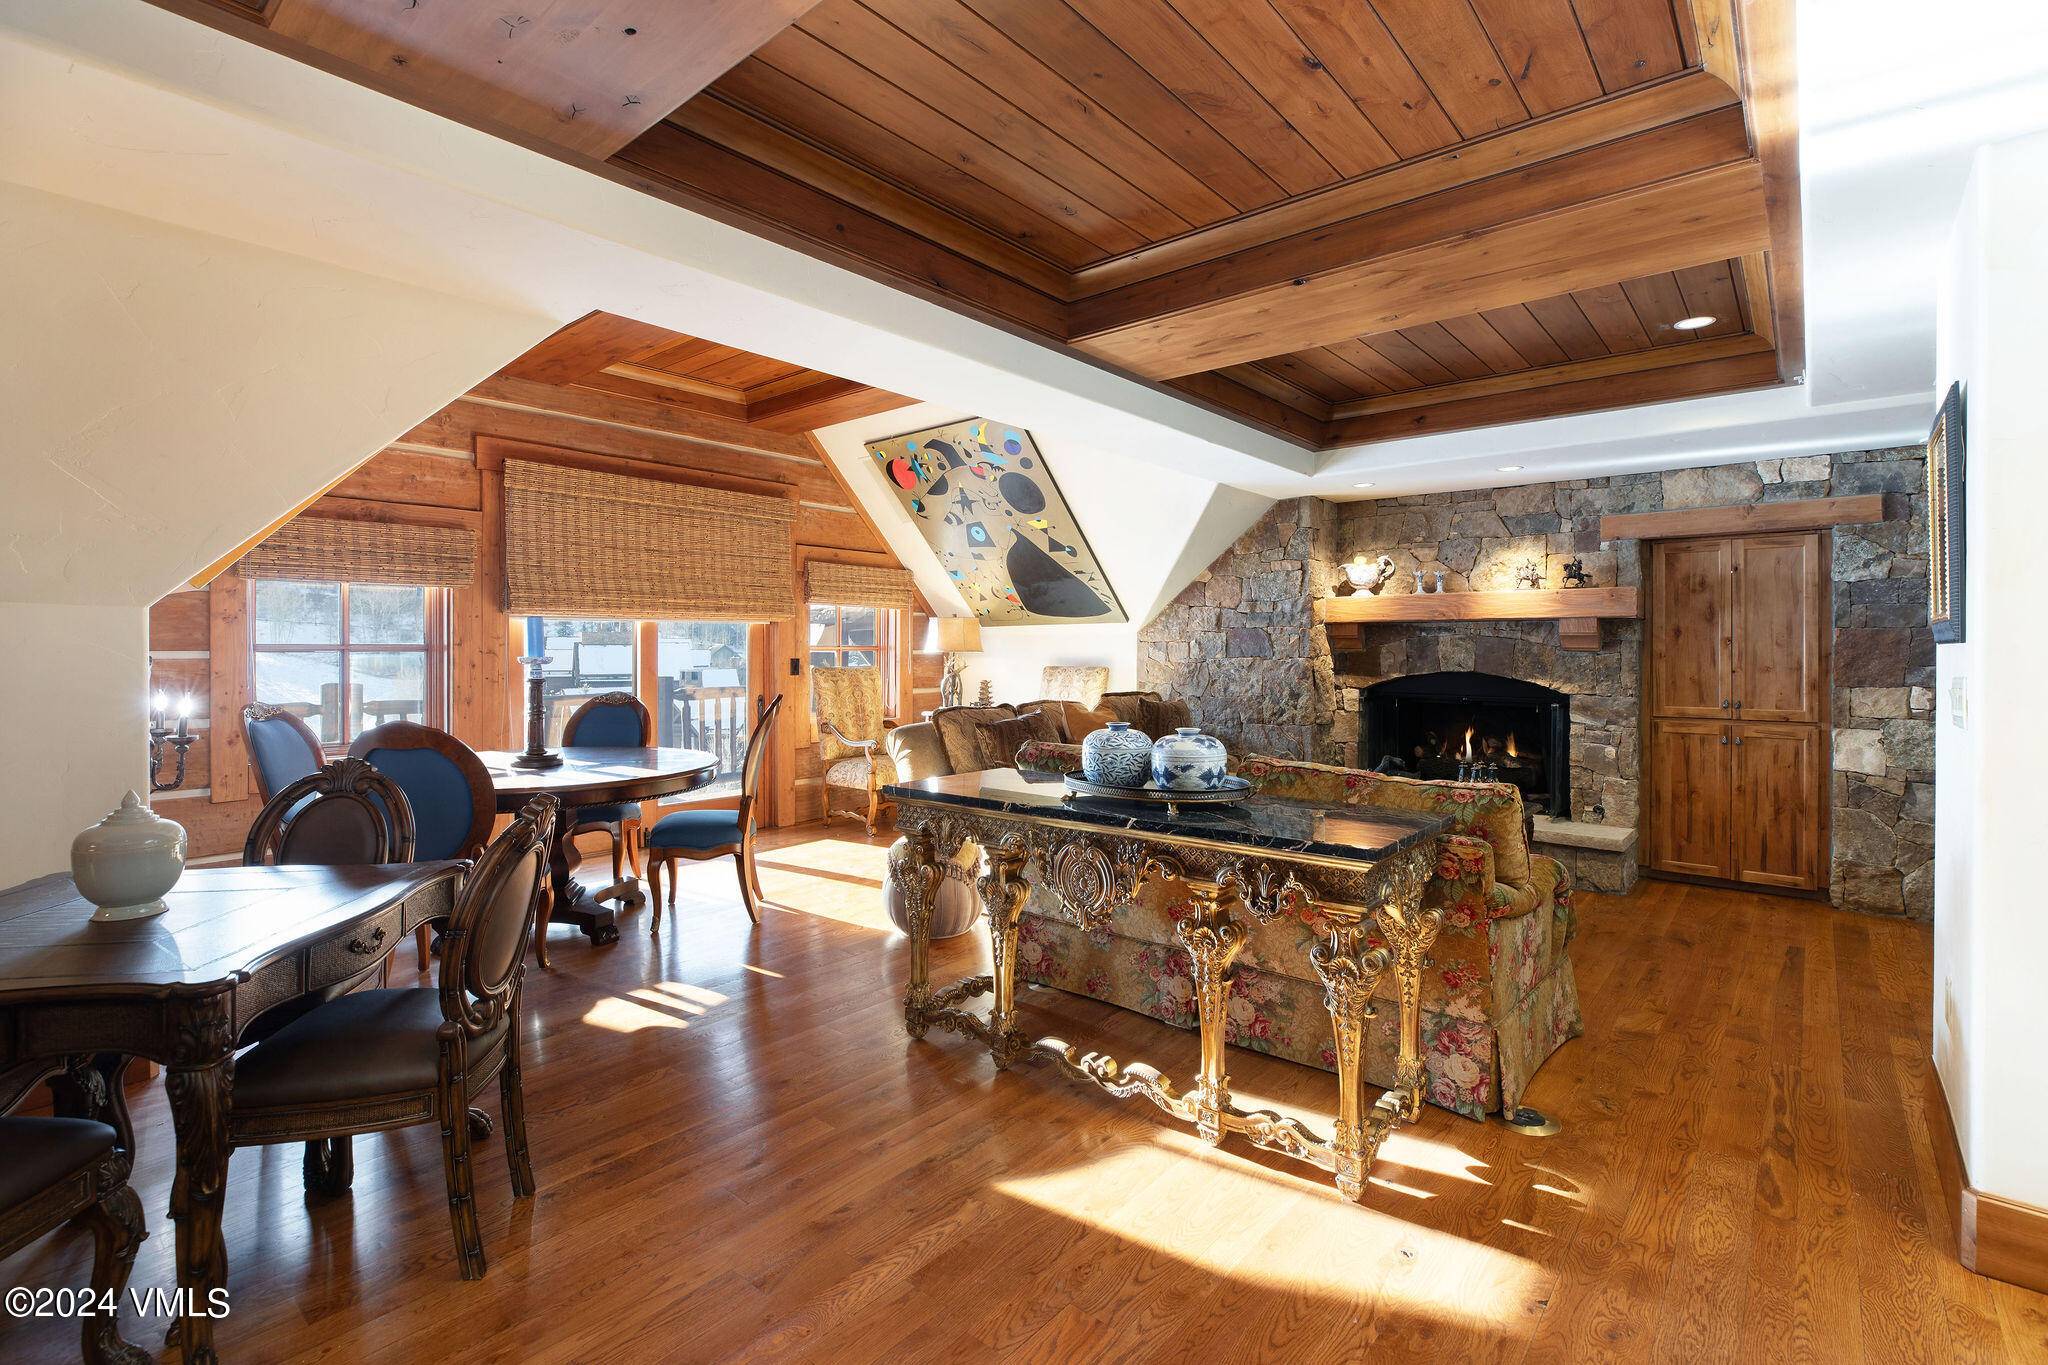 Rare opportunity to own a top floor penthouse at the exclusive Ritz Carlton with vaulted ceilings and dramatic sunlit views south of the ski slopes and mountains beyond.